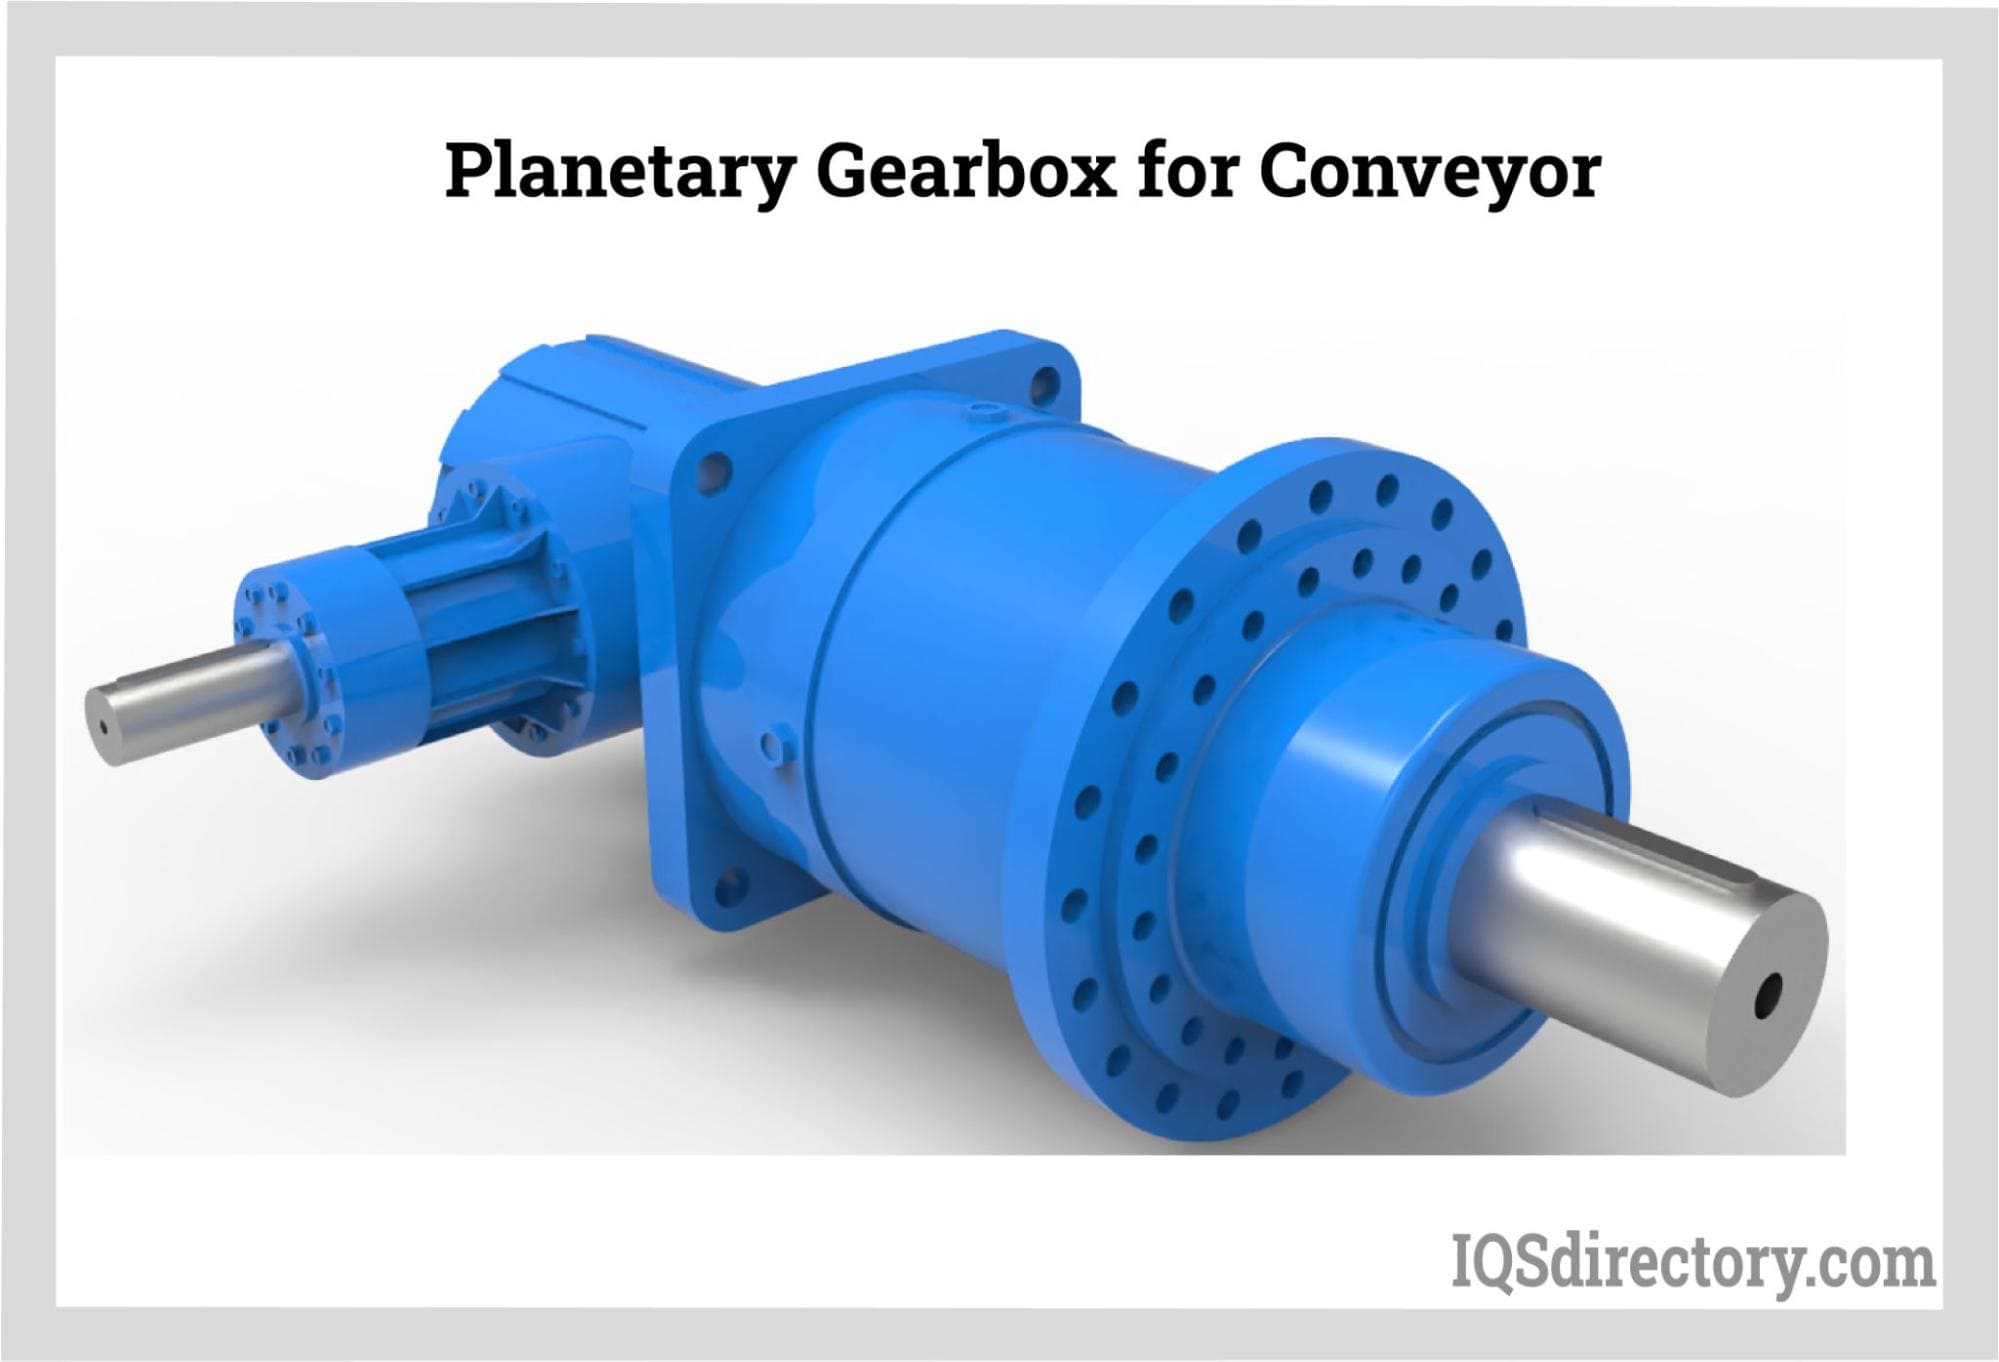 Planetary Gearbox for Conveyor